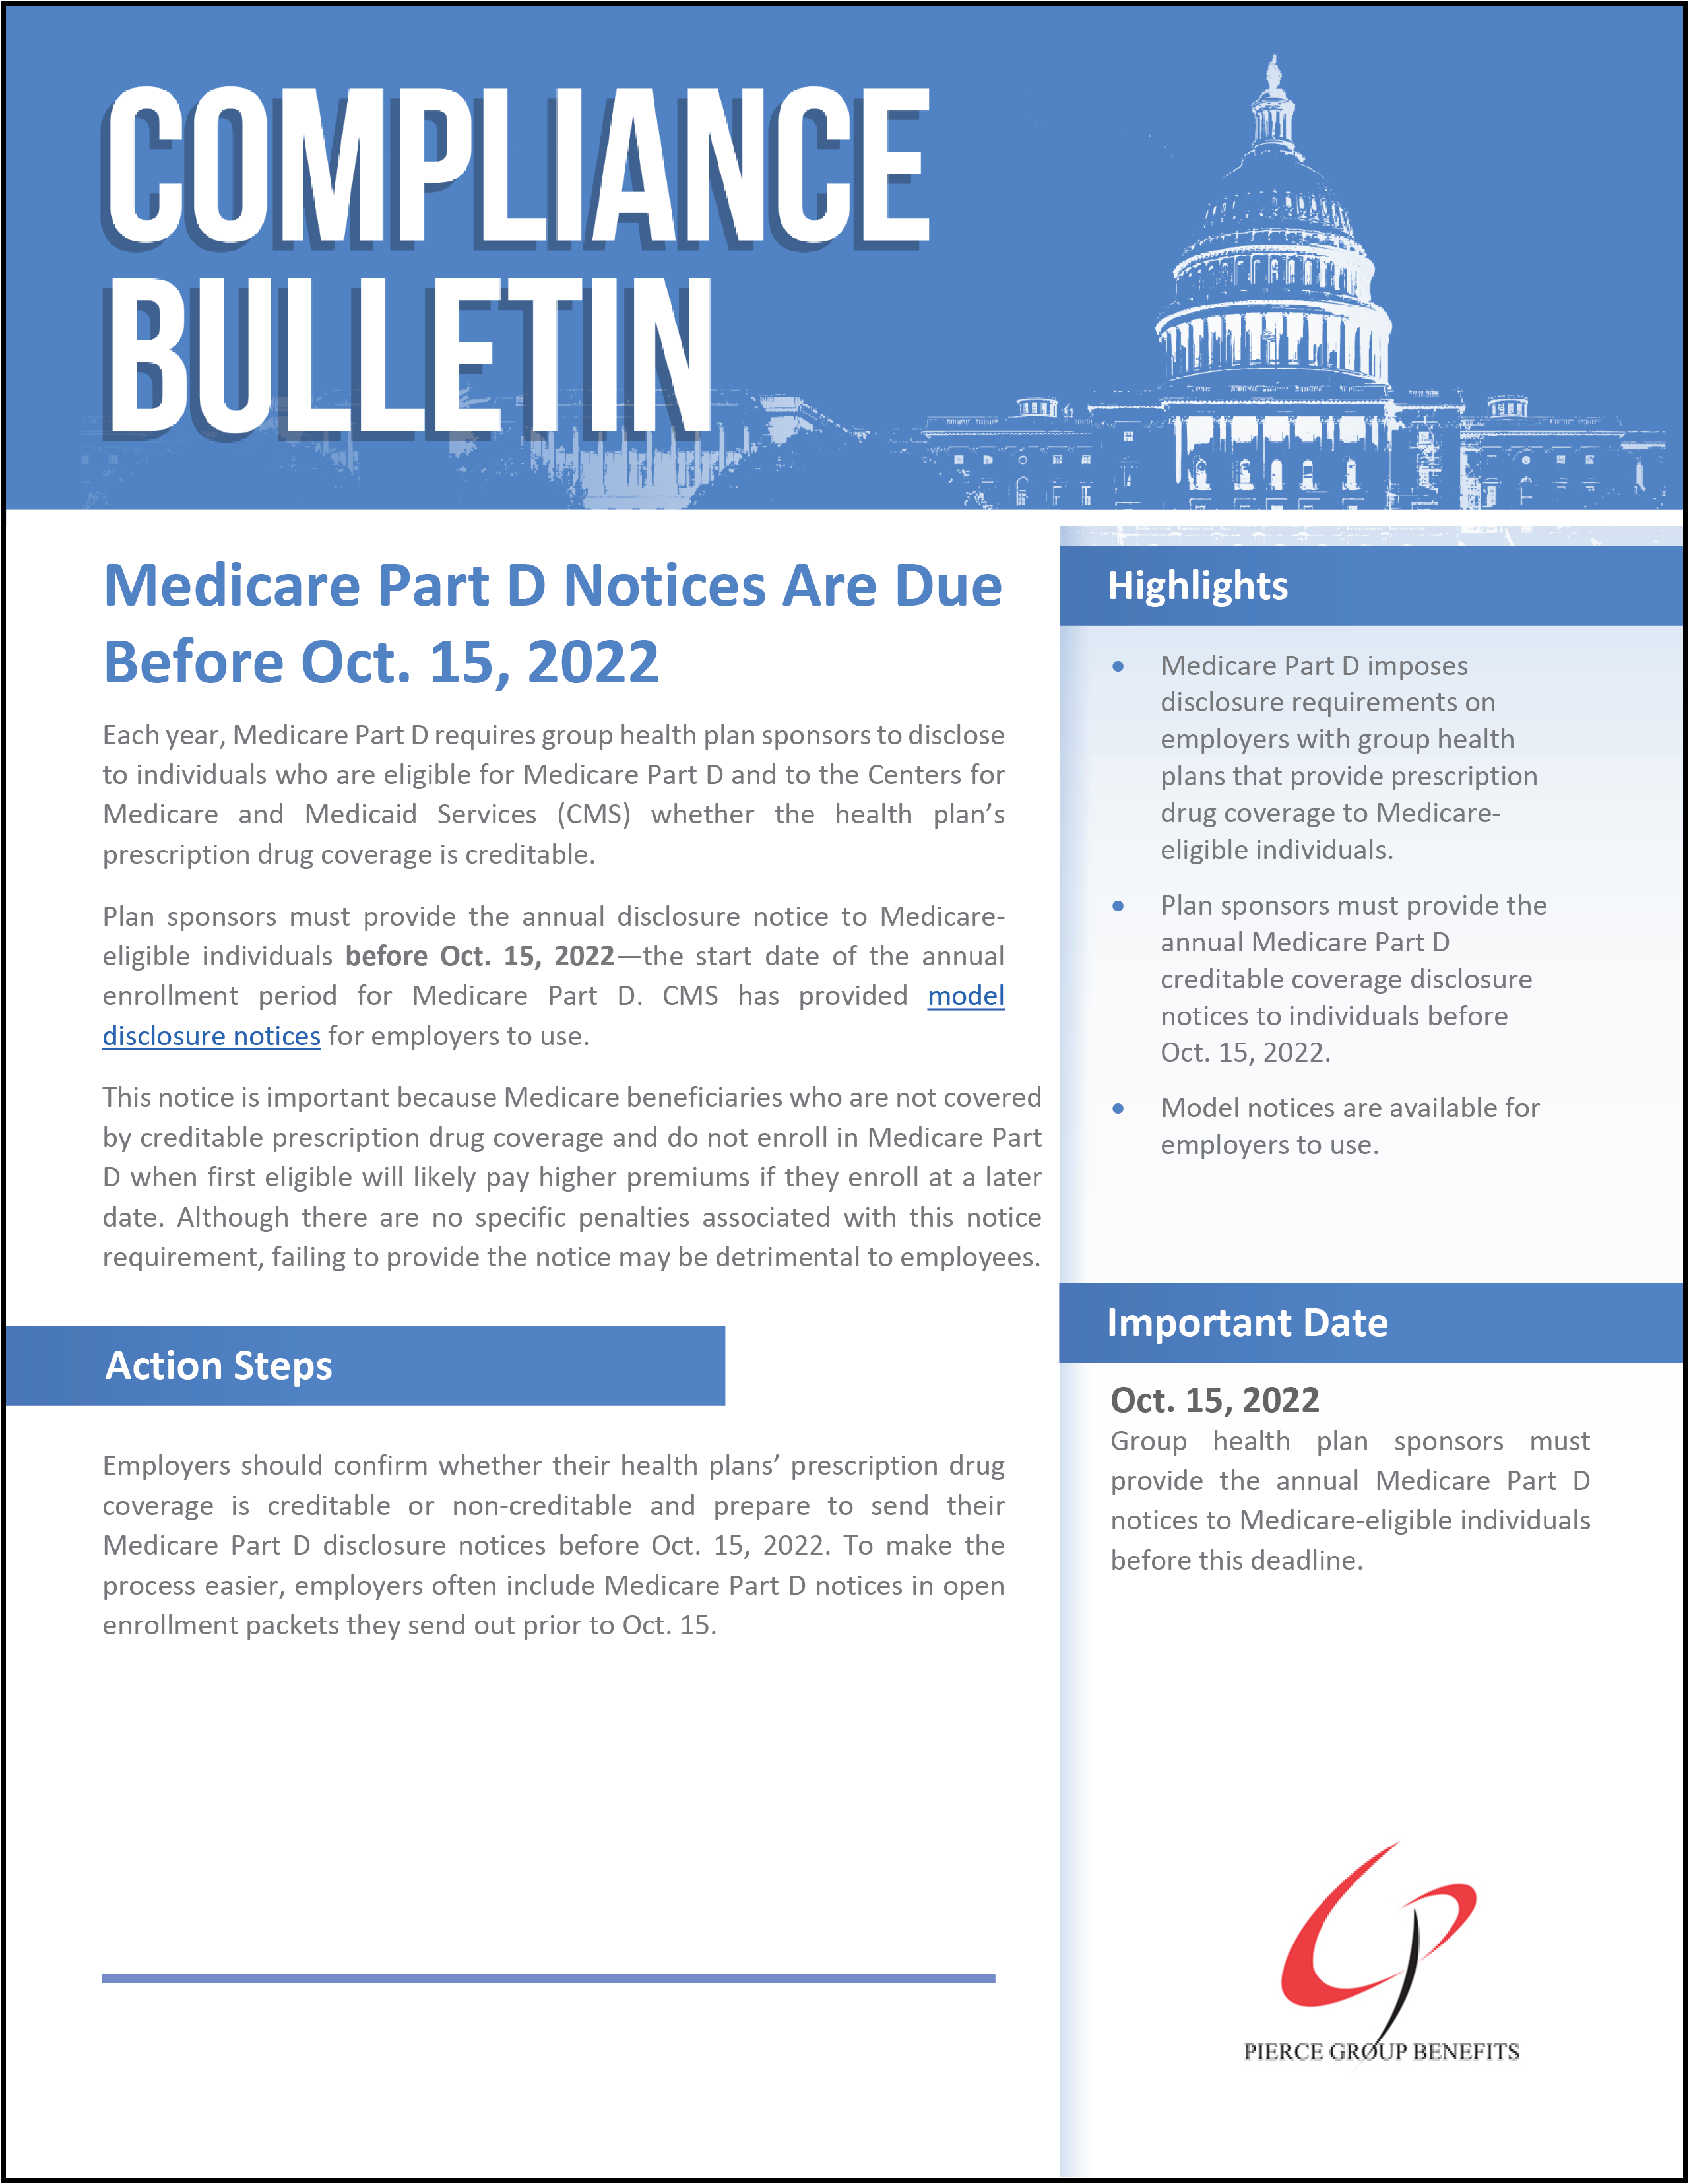 medicare-part-d-notices-are-due-before-oct-15-2022-pierce-group